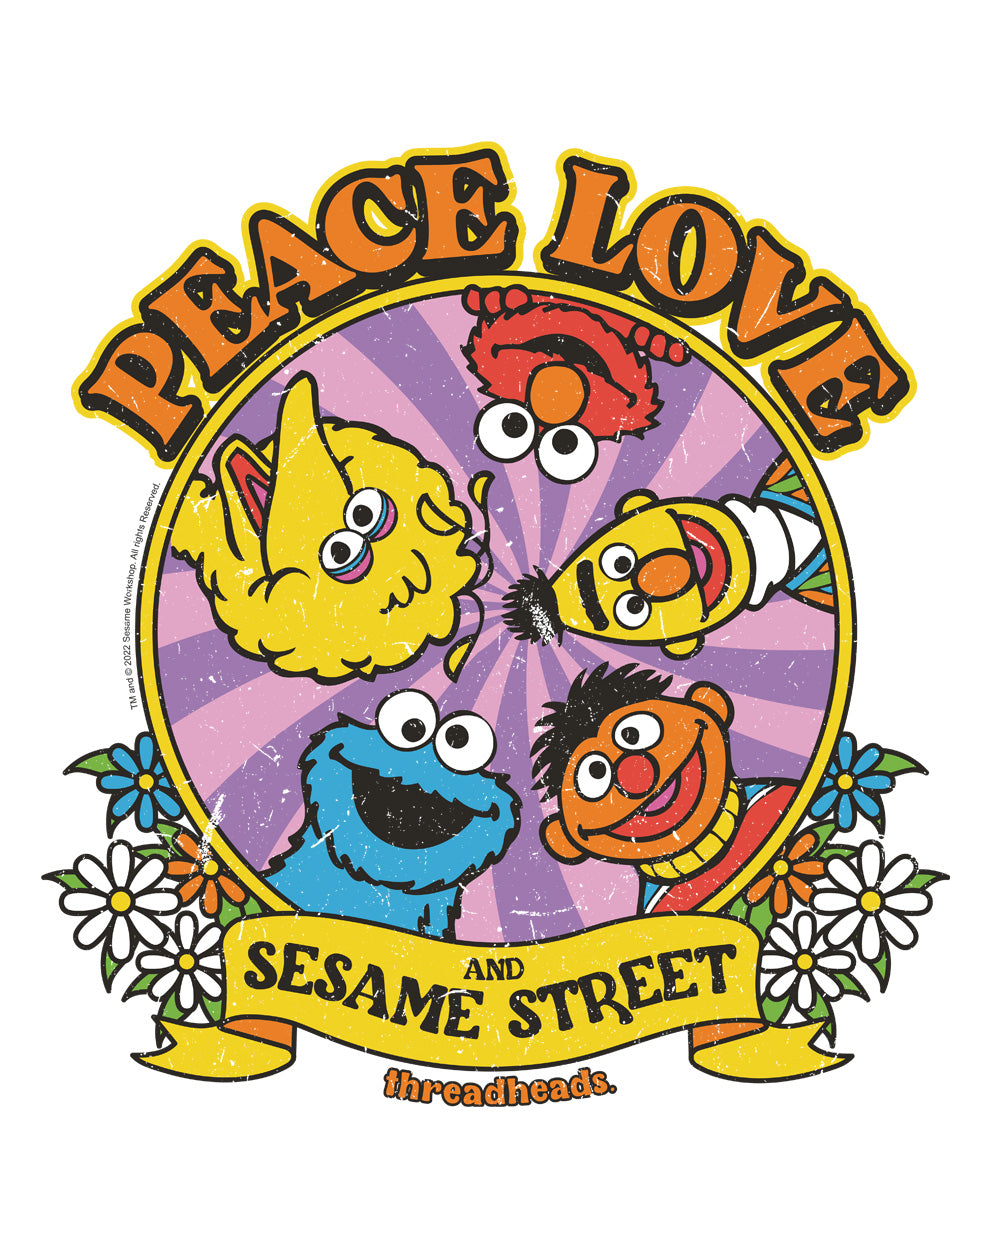 Peace Love And Sesame Street Classic Retro Vintage Educational Puppet TV Program Officially Licensed T-Shirt